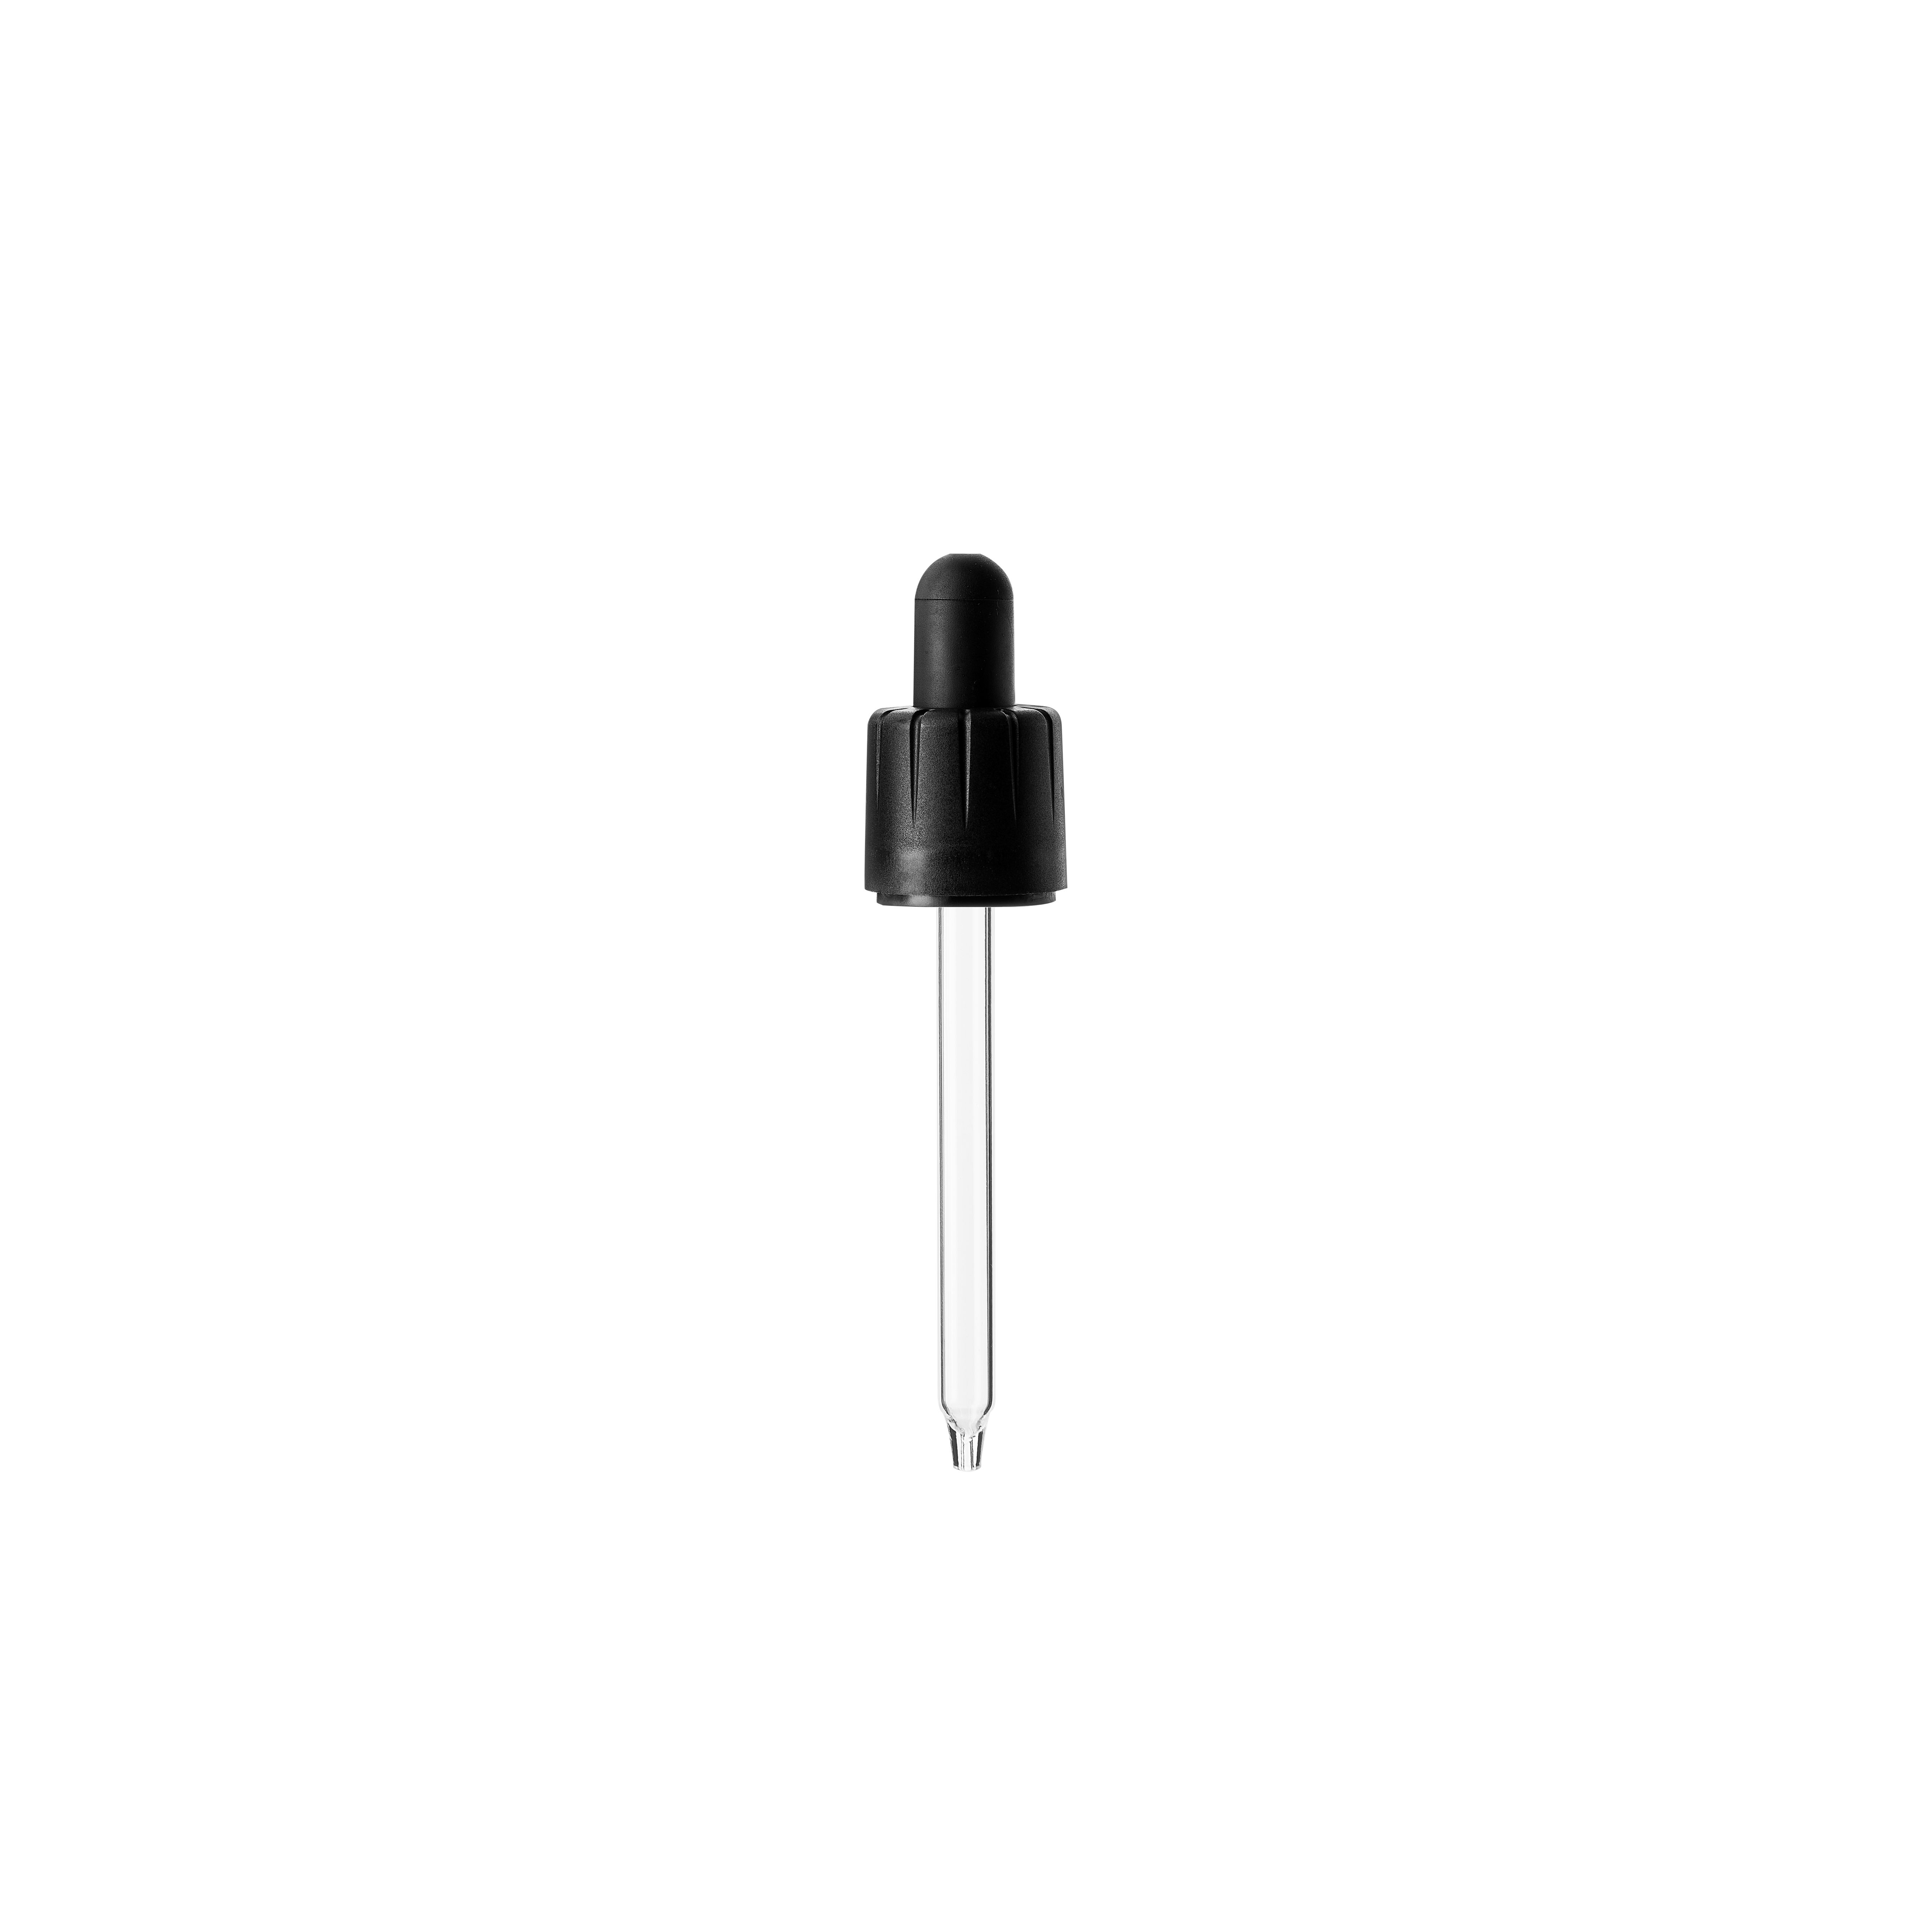 Child-resistant pipette series II, DIN18, tamper-evident, PP/PEHD, black, fine ribbed, black bulb TPE 1.0 ml, conical tip with 1.0 opening for Ginger 50 ml